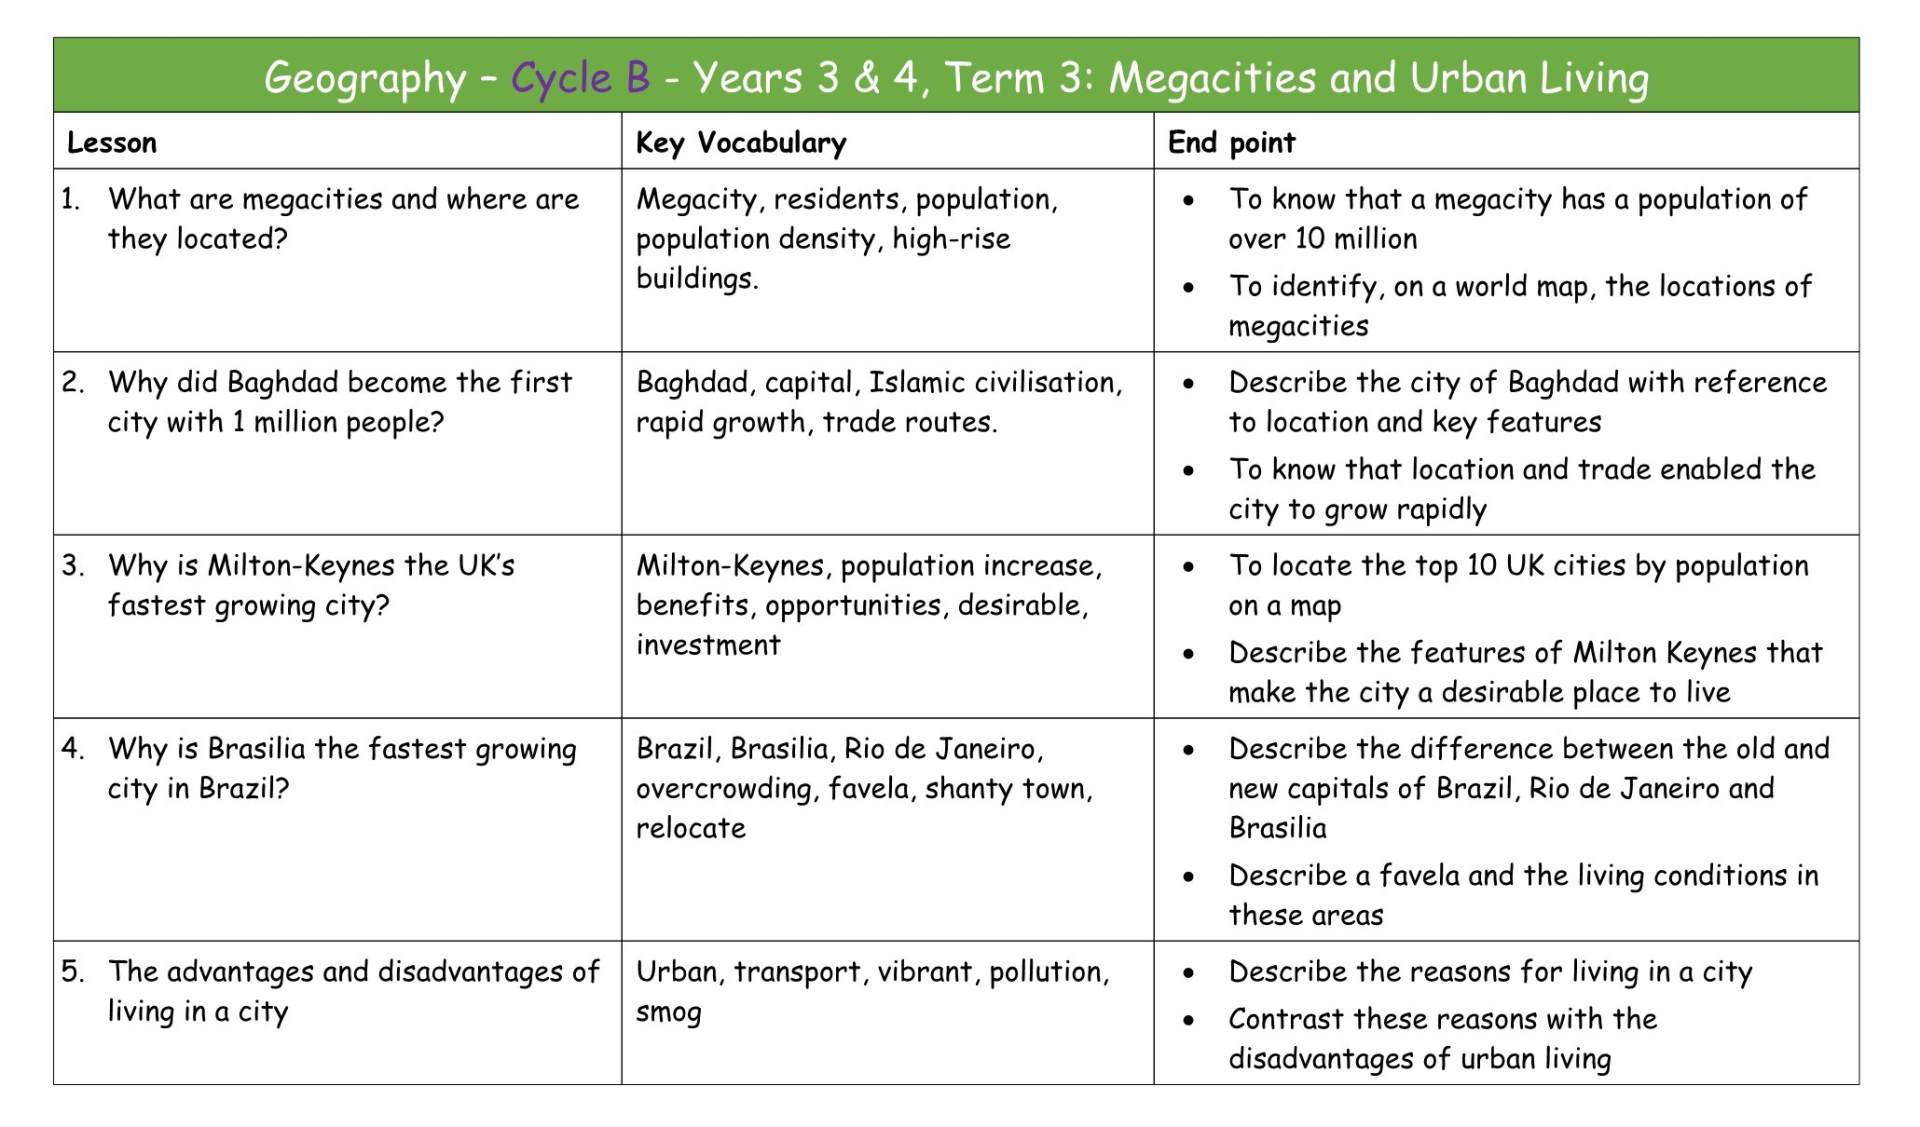 Geography Y3&4 Cycle B MTP T3